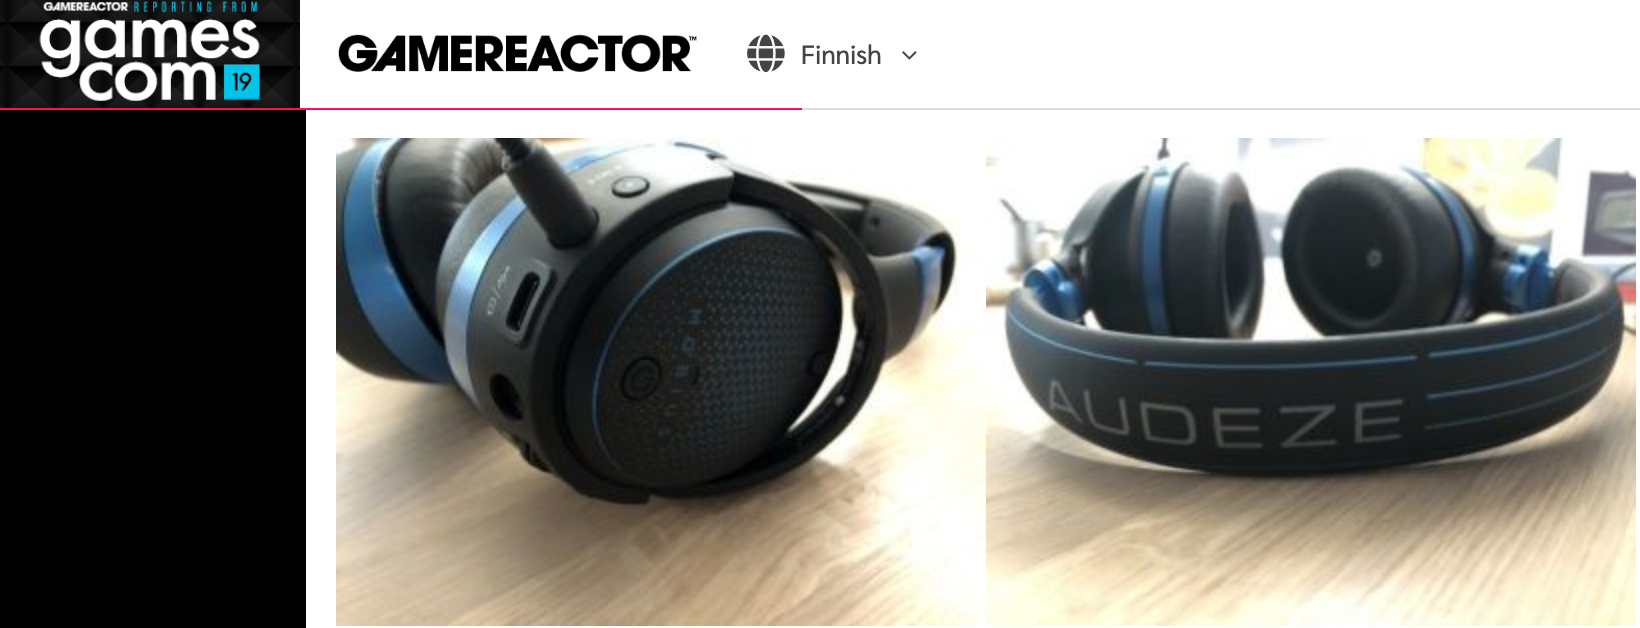 Game Reactor Finalnd reviews the Mobius